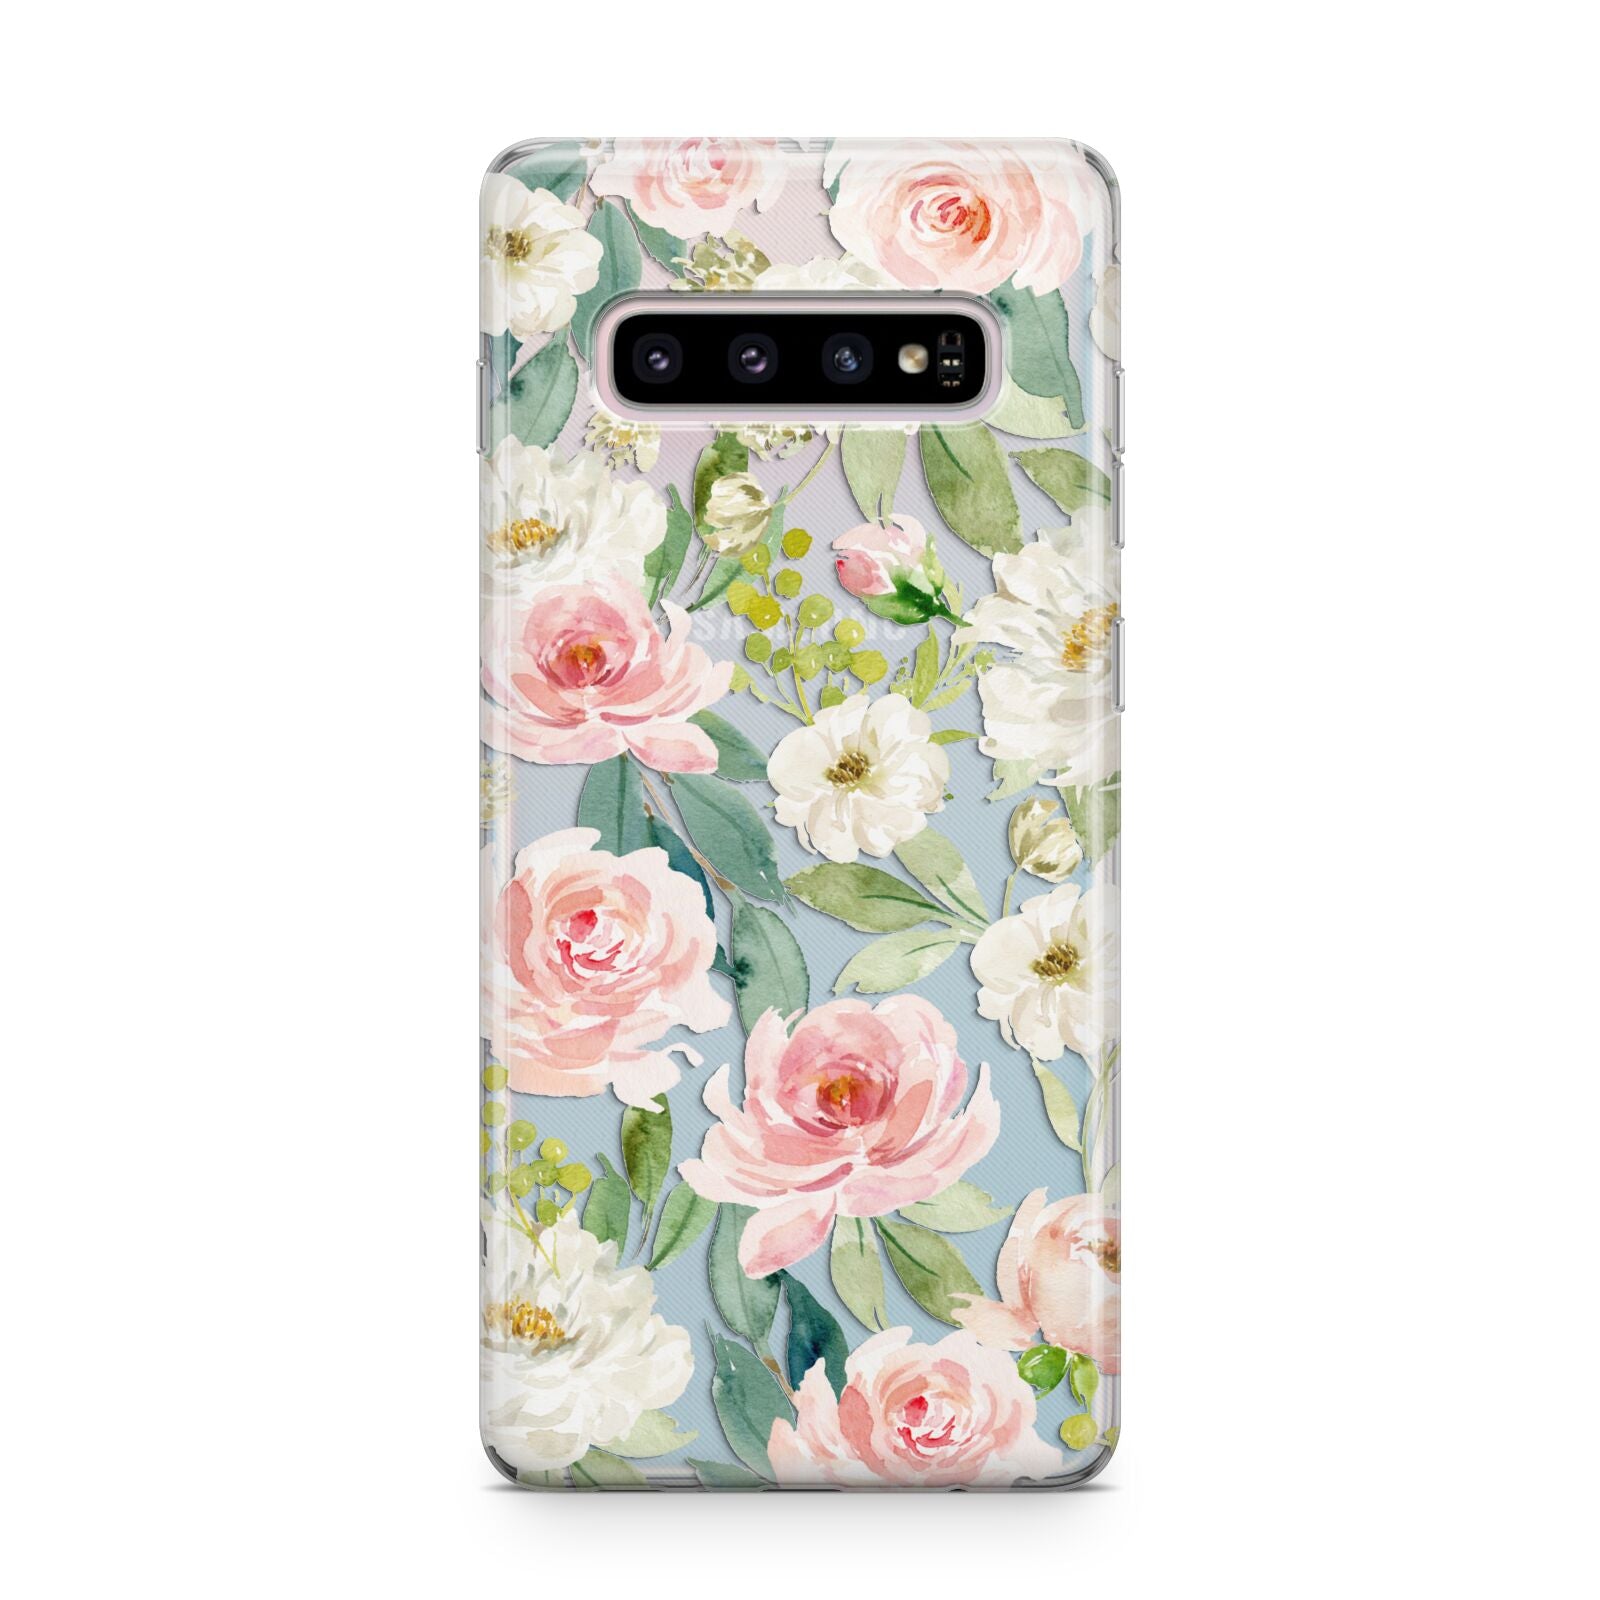 Watercolour Peonies Roses and Foliage Samsung Galaxy S10 Plus Case